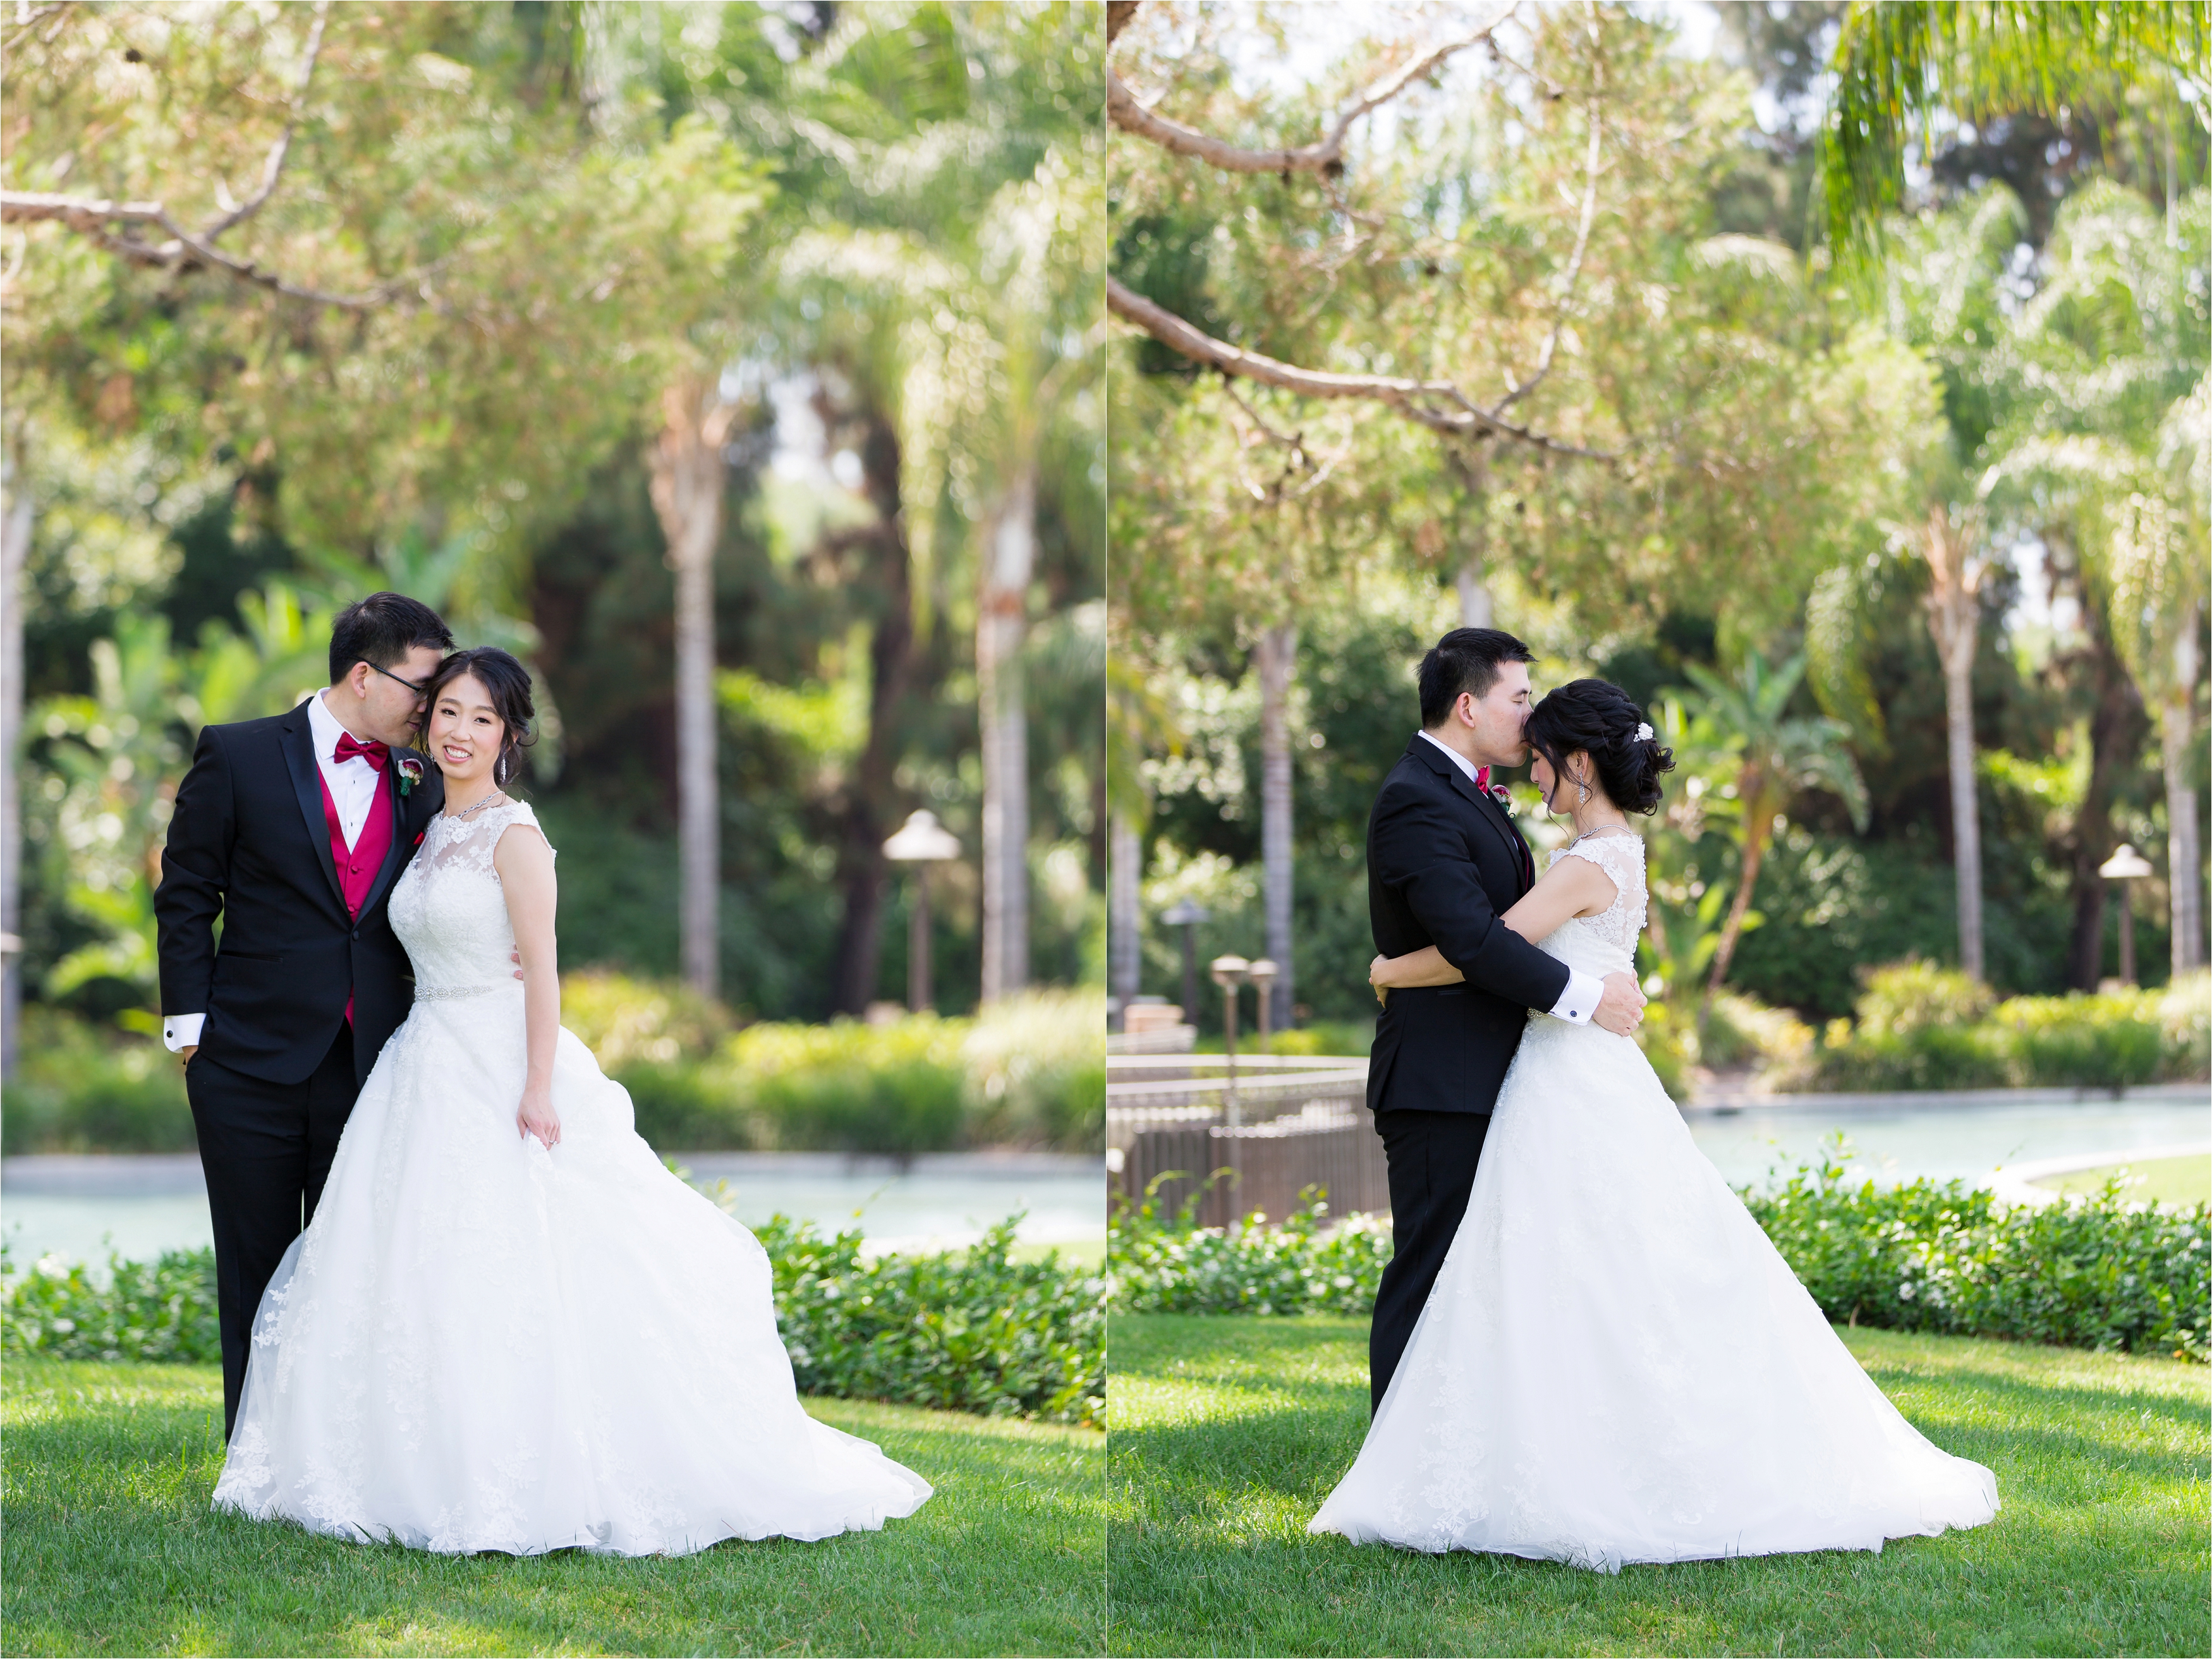 Cute couple's portrait of bride and groom outdoors